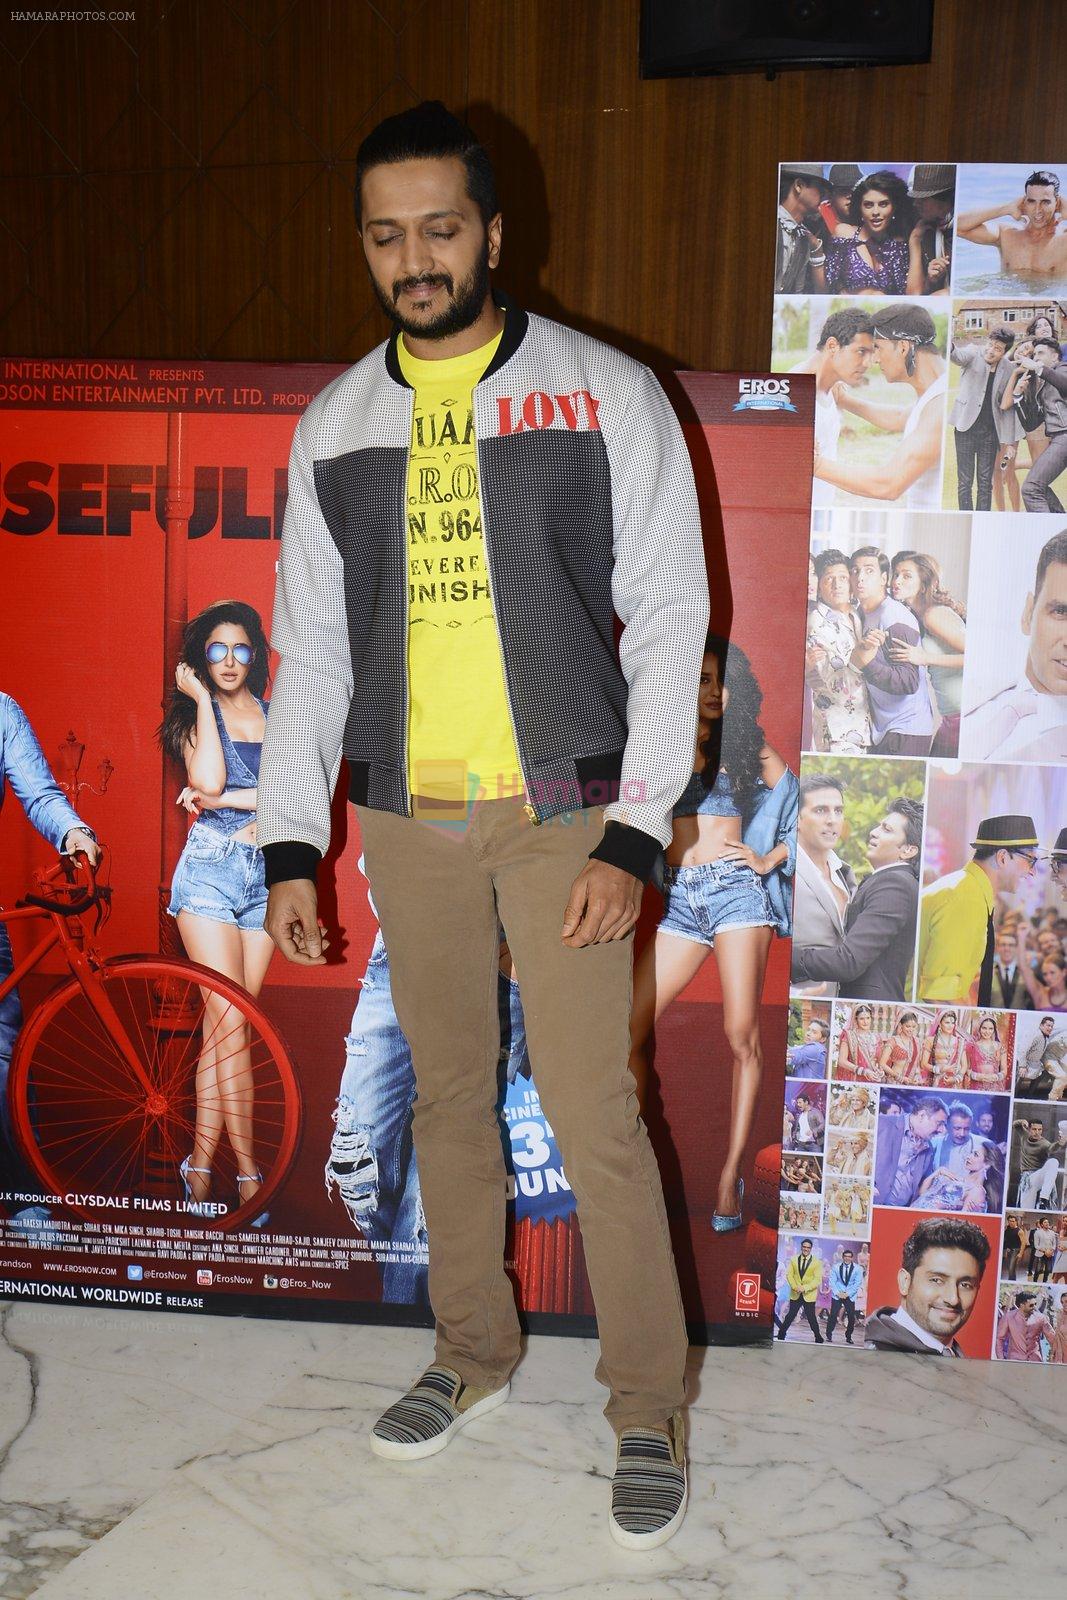 Riteish Deshmukh snapped at Housefull 3 interview on 28th May 2016